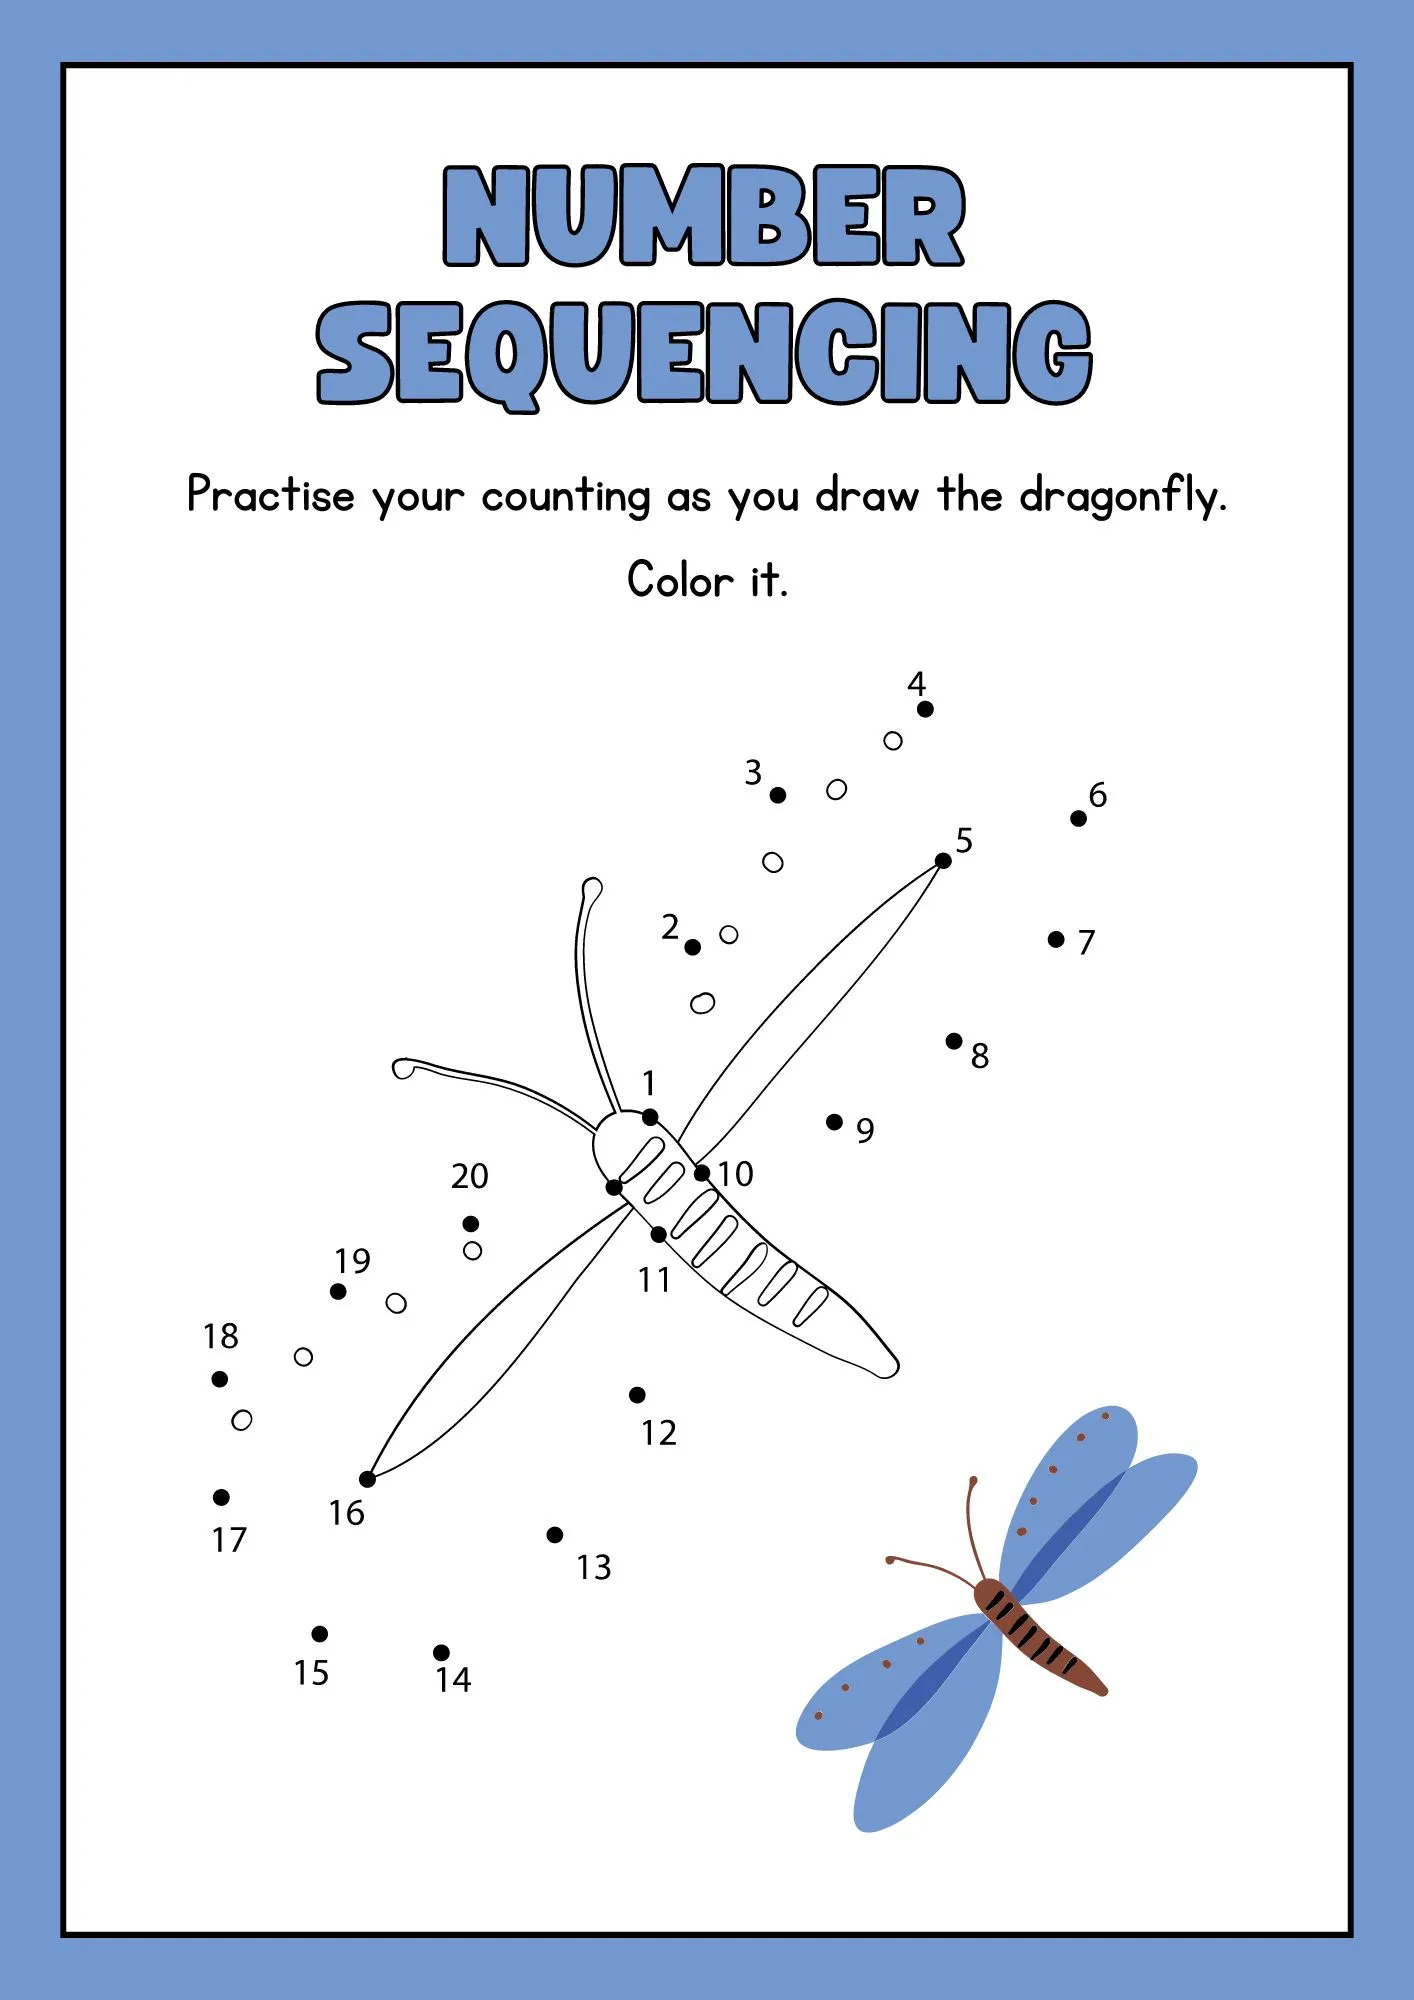 Number Sequencing Activity Worksheet trace and color the (dragon fly)